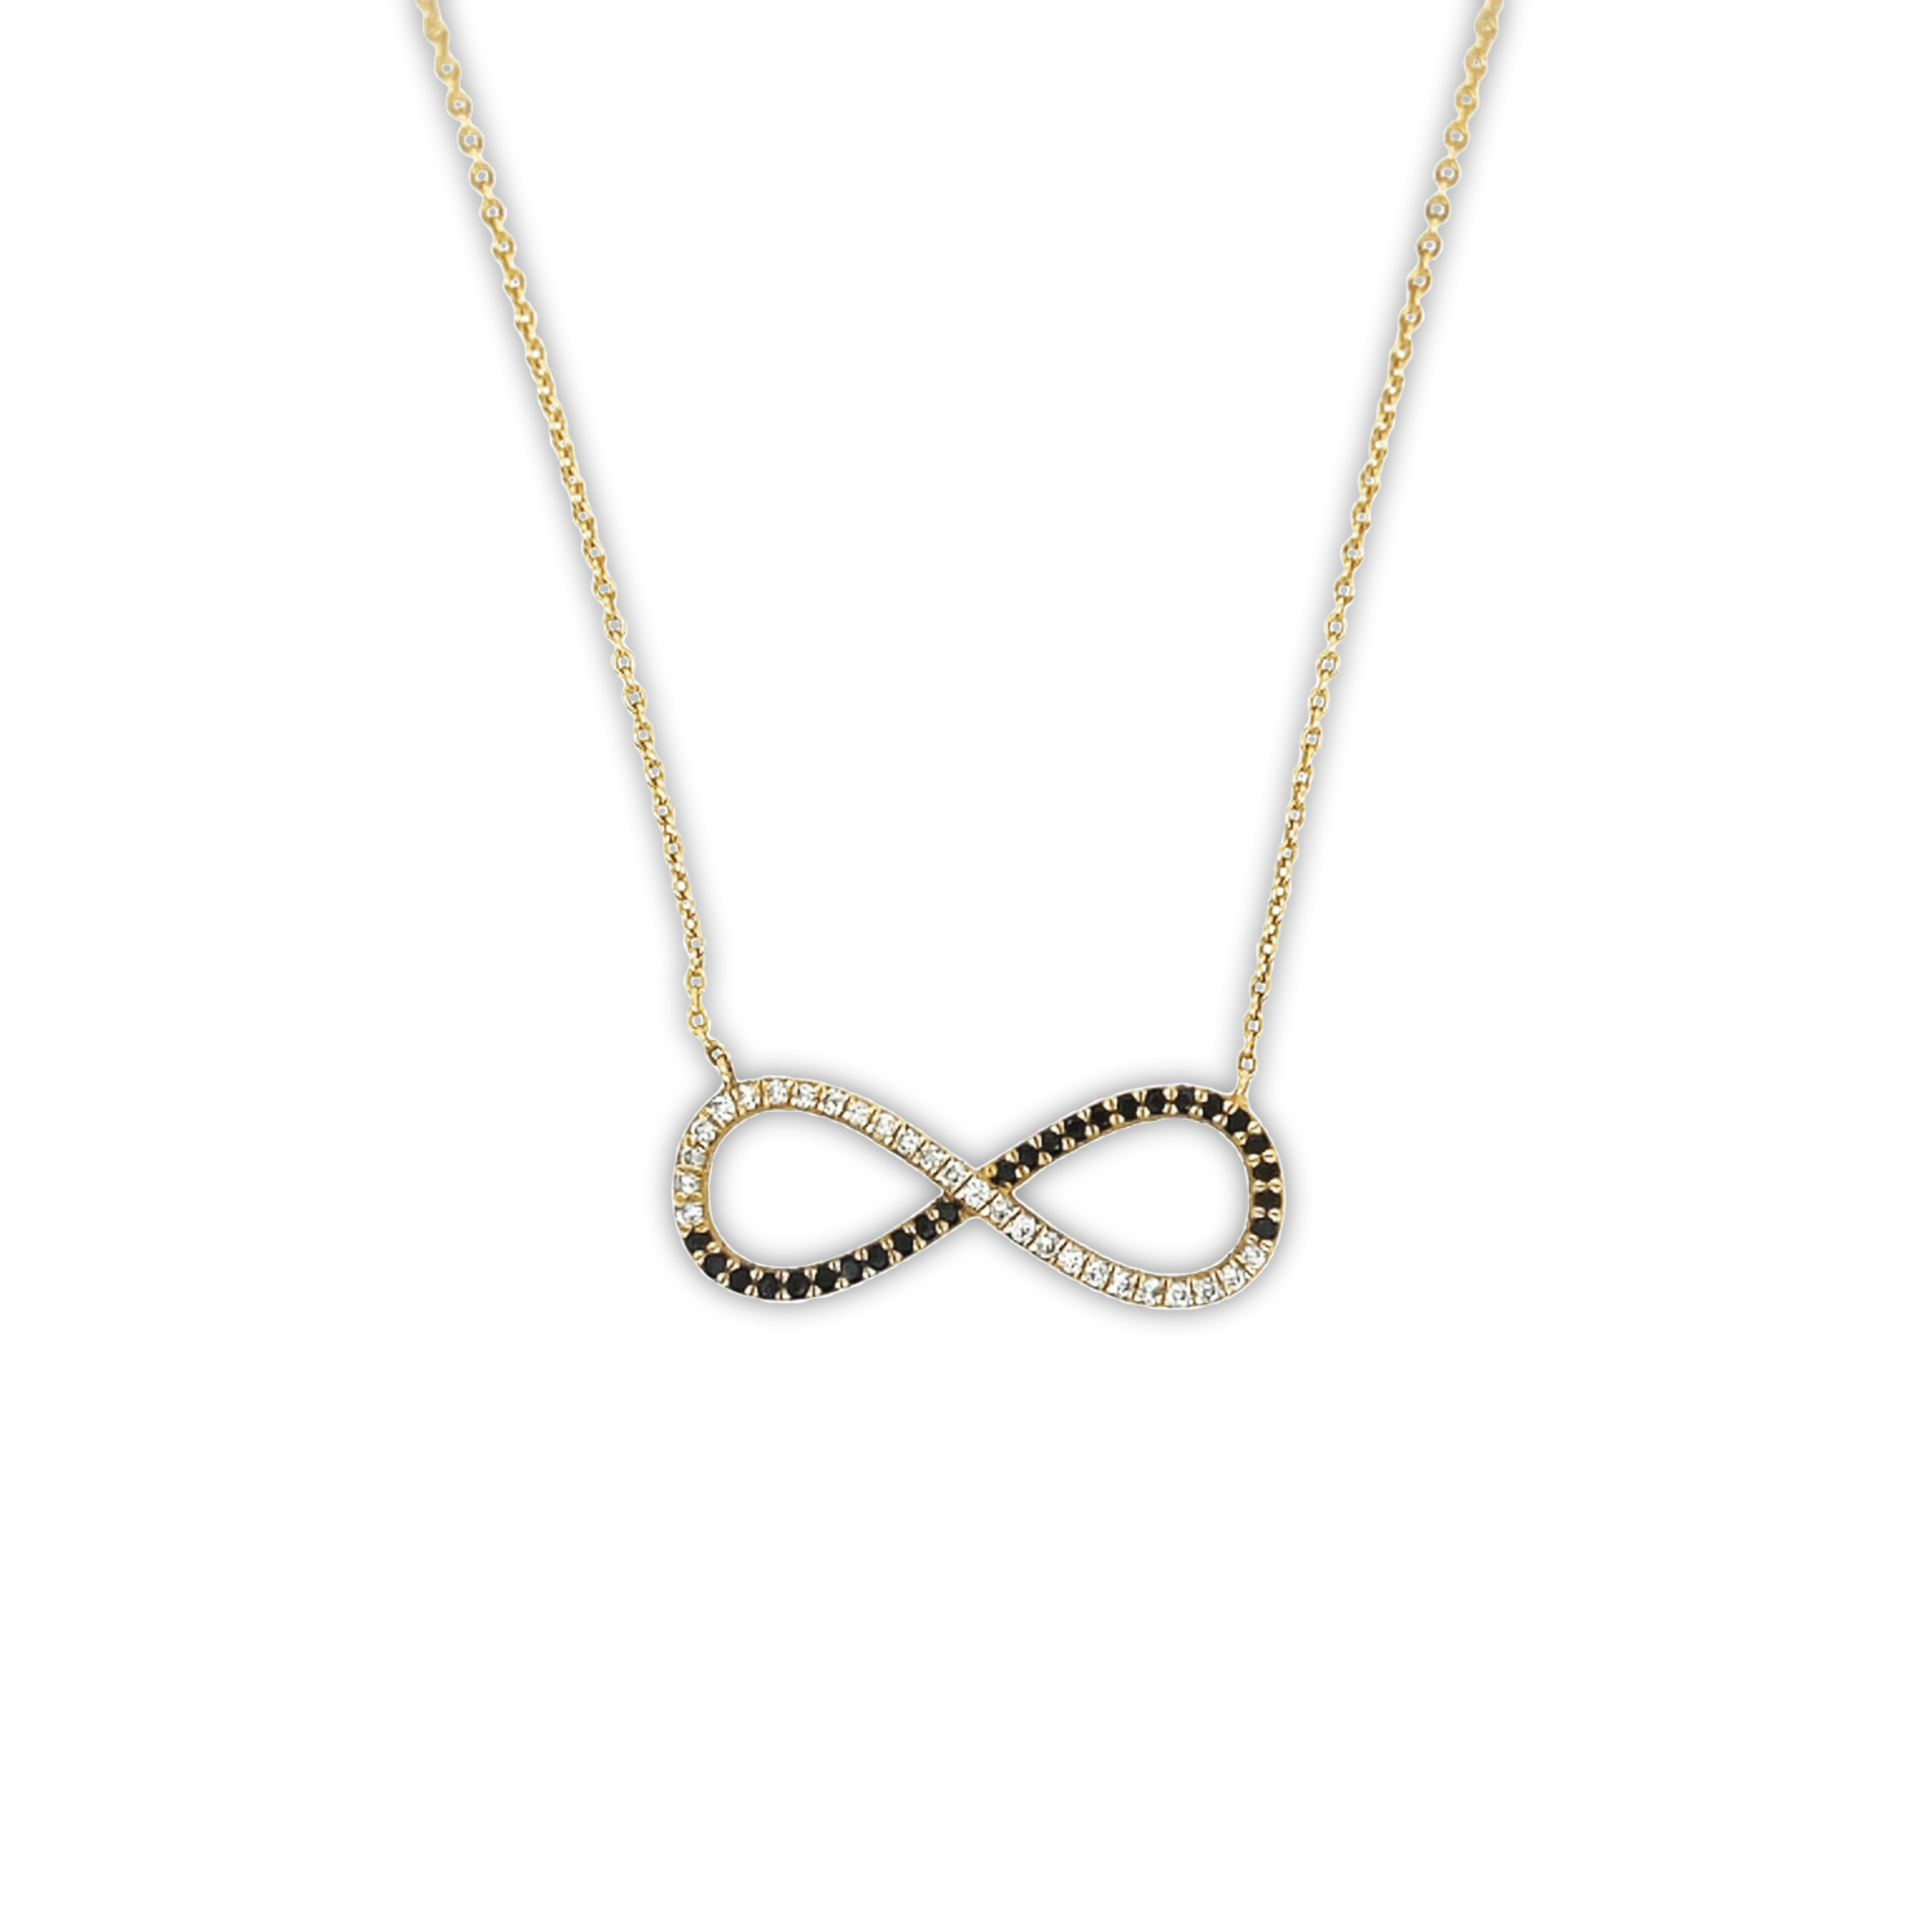 Featured image for “Black and White Infinity Necklace”